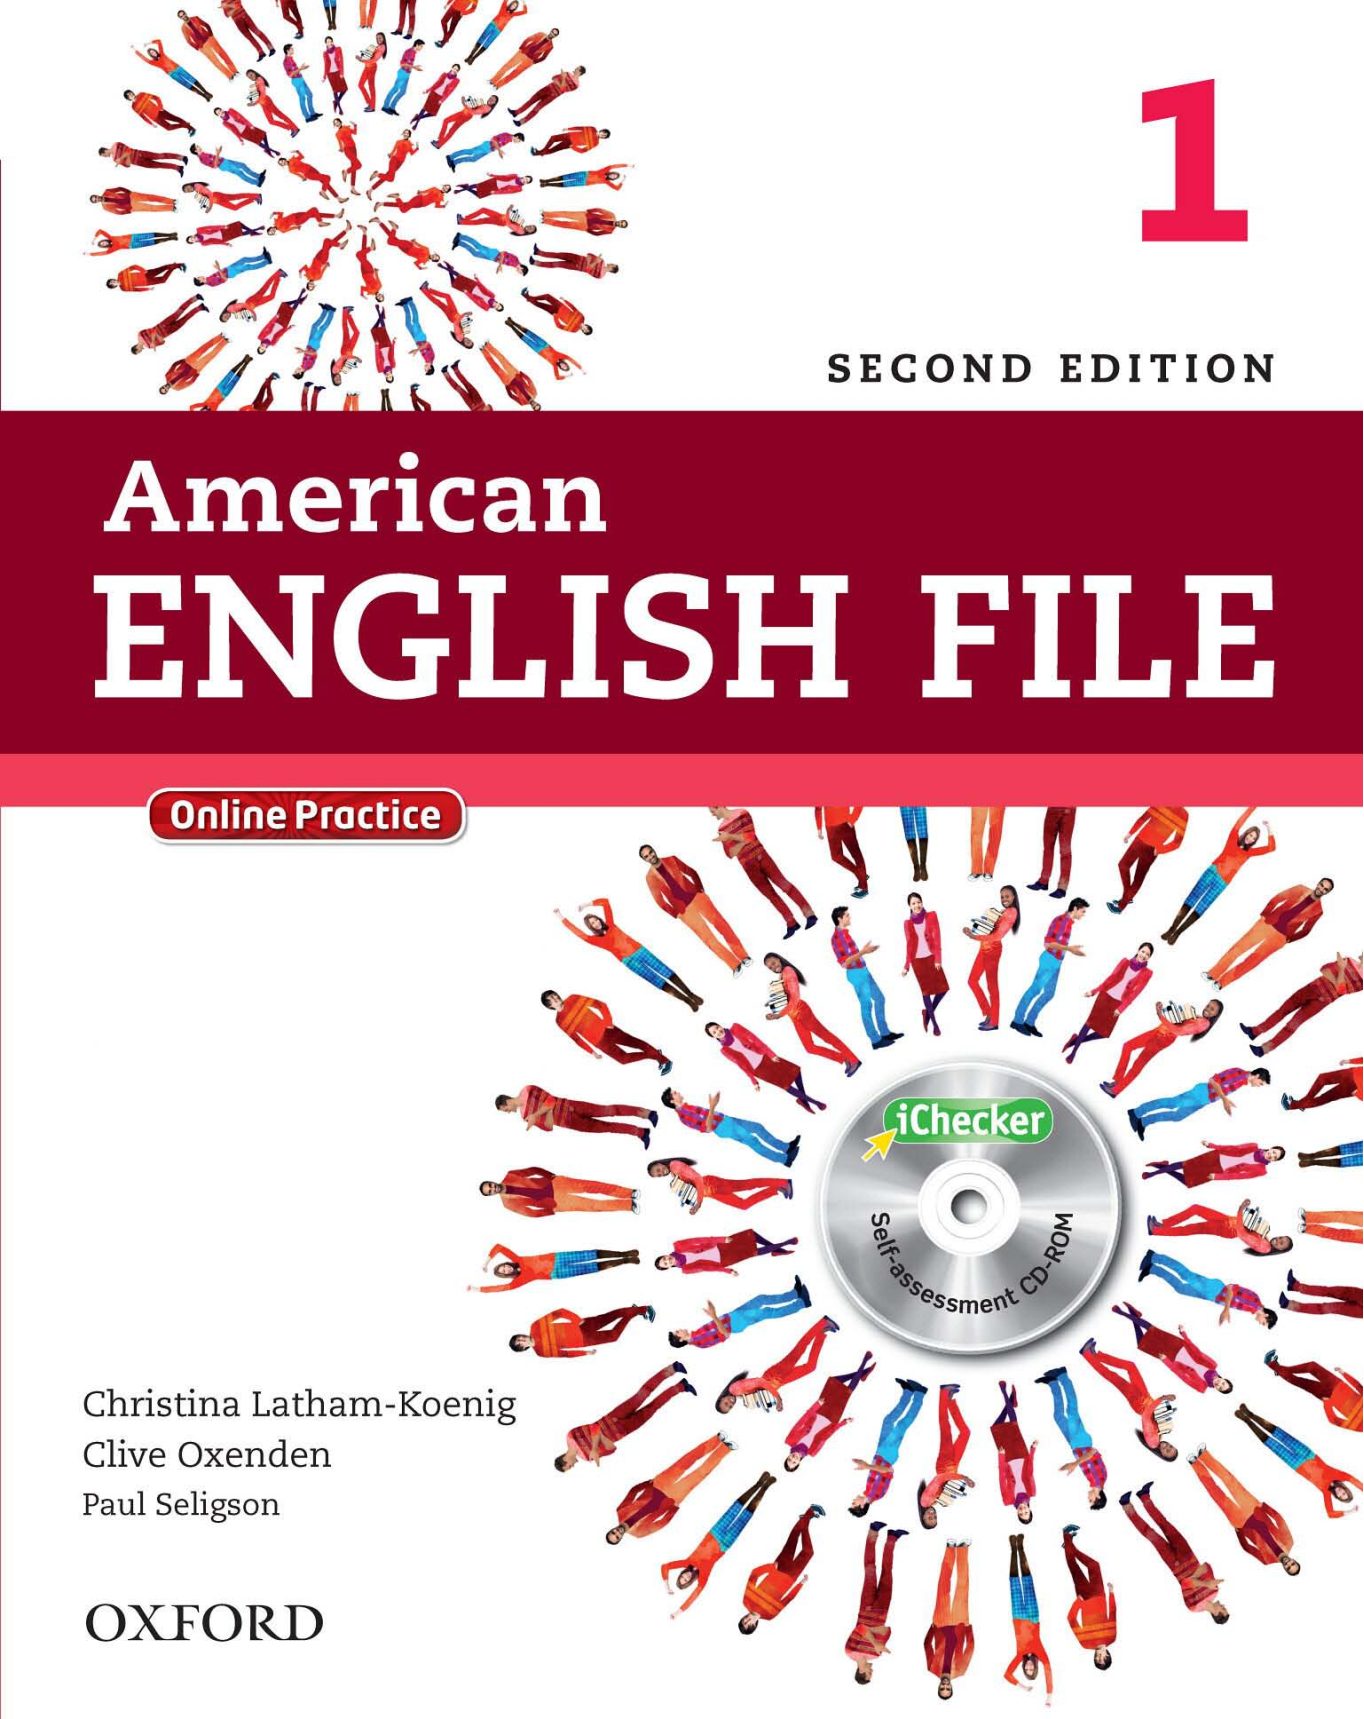 Rich Results on Google's SERP when searching for 'American English Student Book 1'